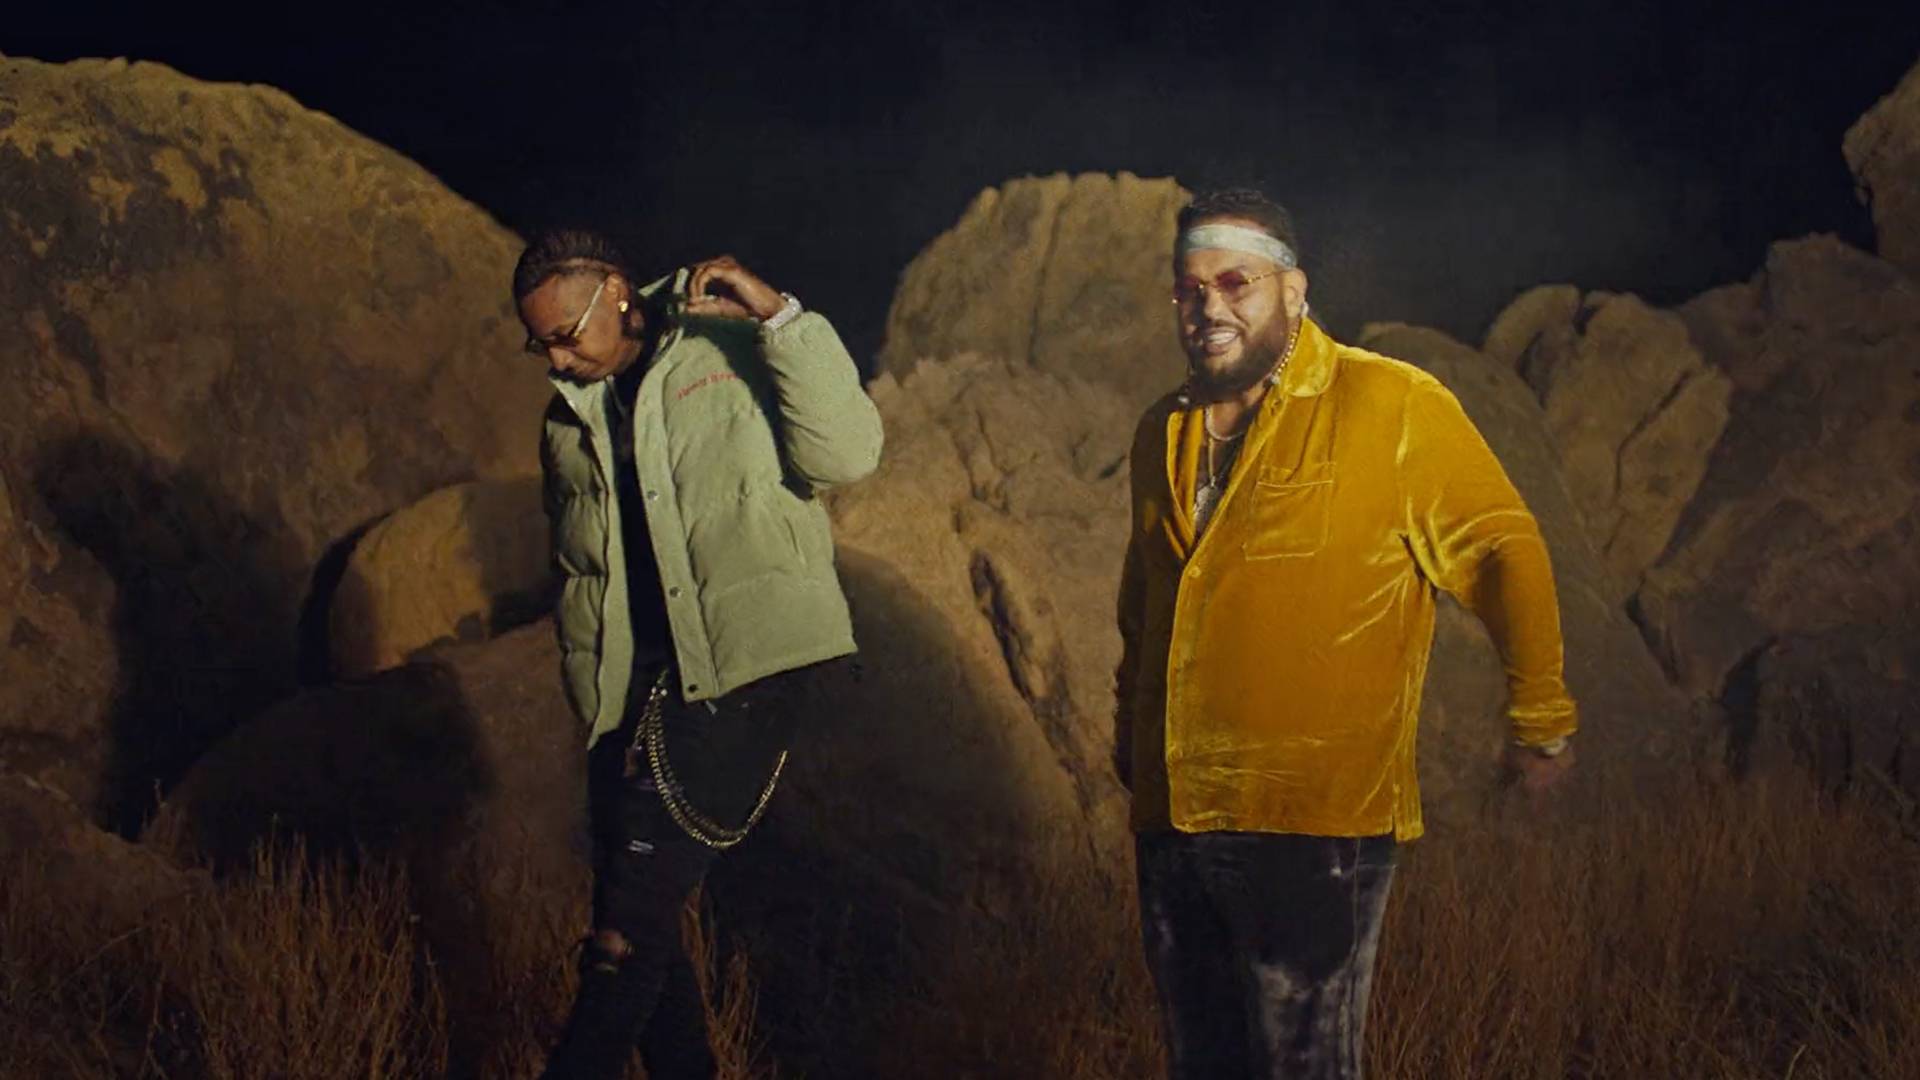 Belly hits the desert in the video for "Zero Love," the hypnotic single from his album "See You Next Wednesday," featuring Moneybagg Yo on BET Jams 2021.